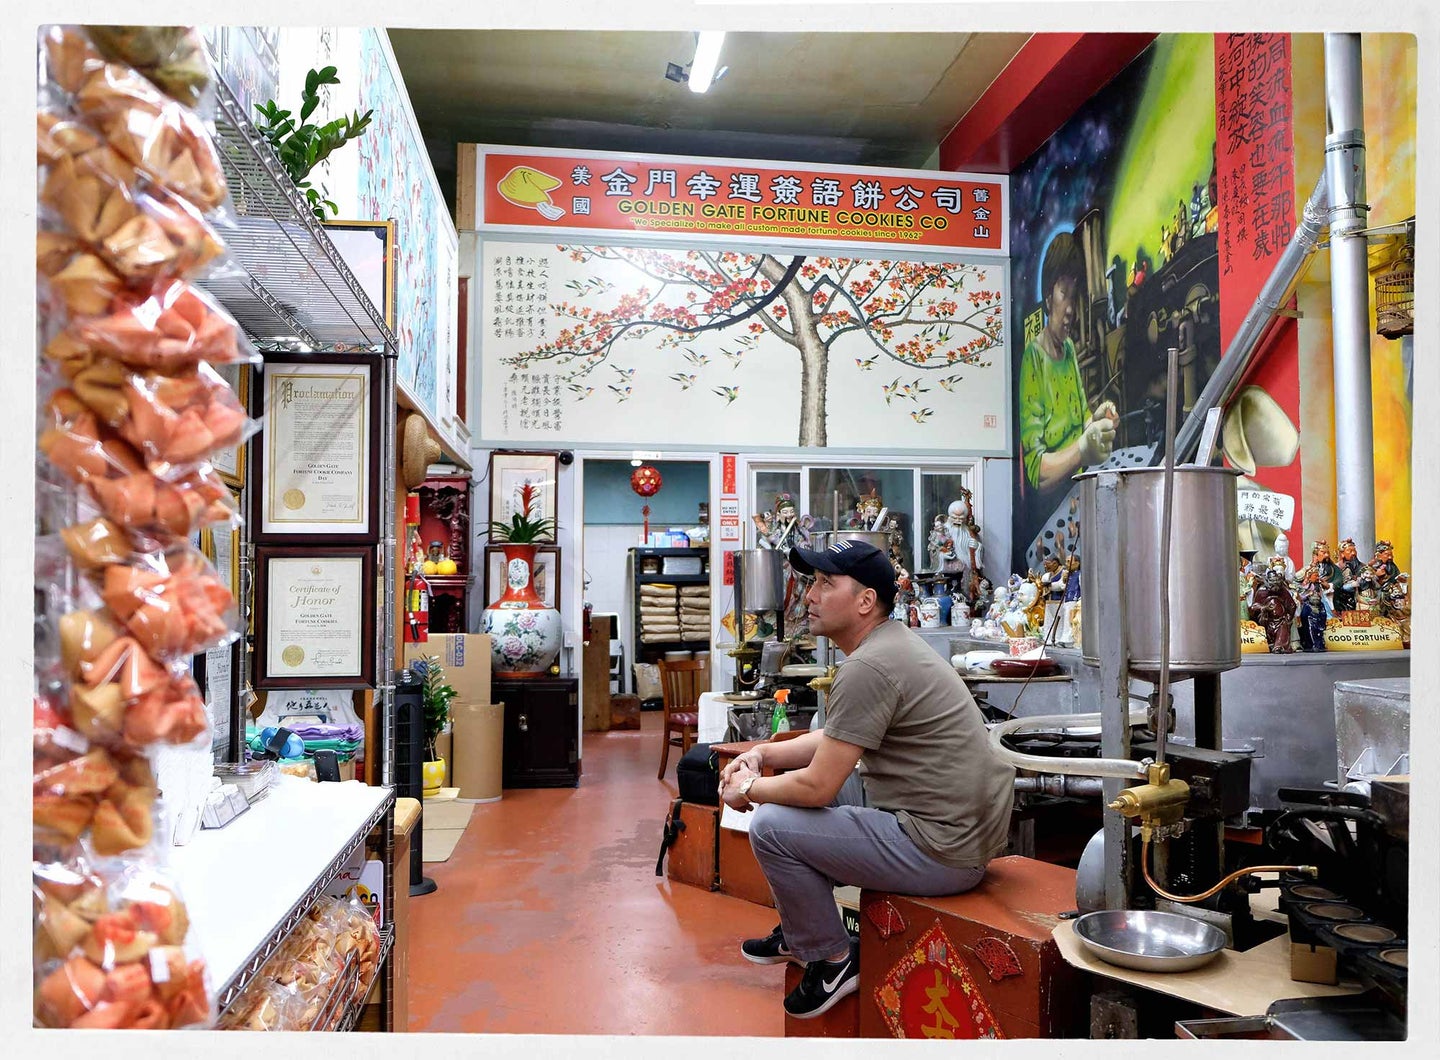 The Golden Gate Fortune Cookie Factory lies on one-block-long Ross Alley in San Francisco’s Chinatown.